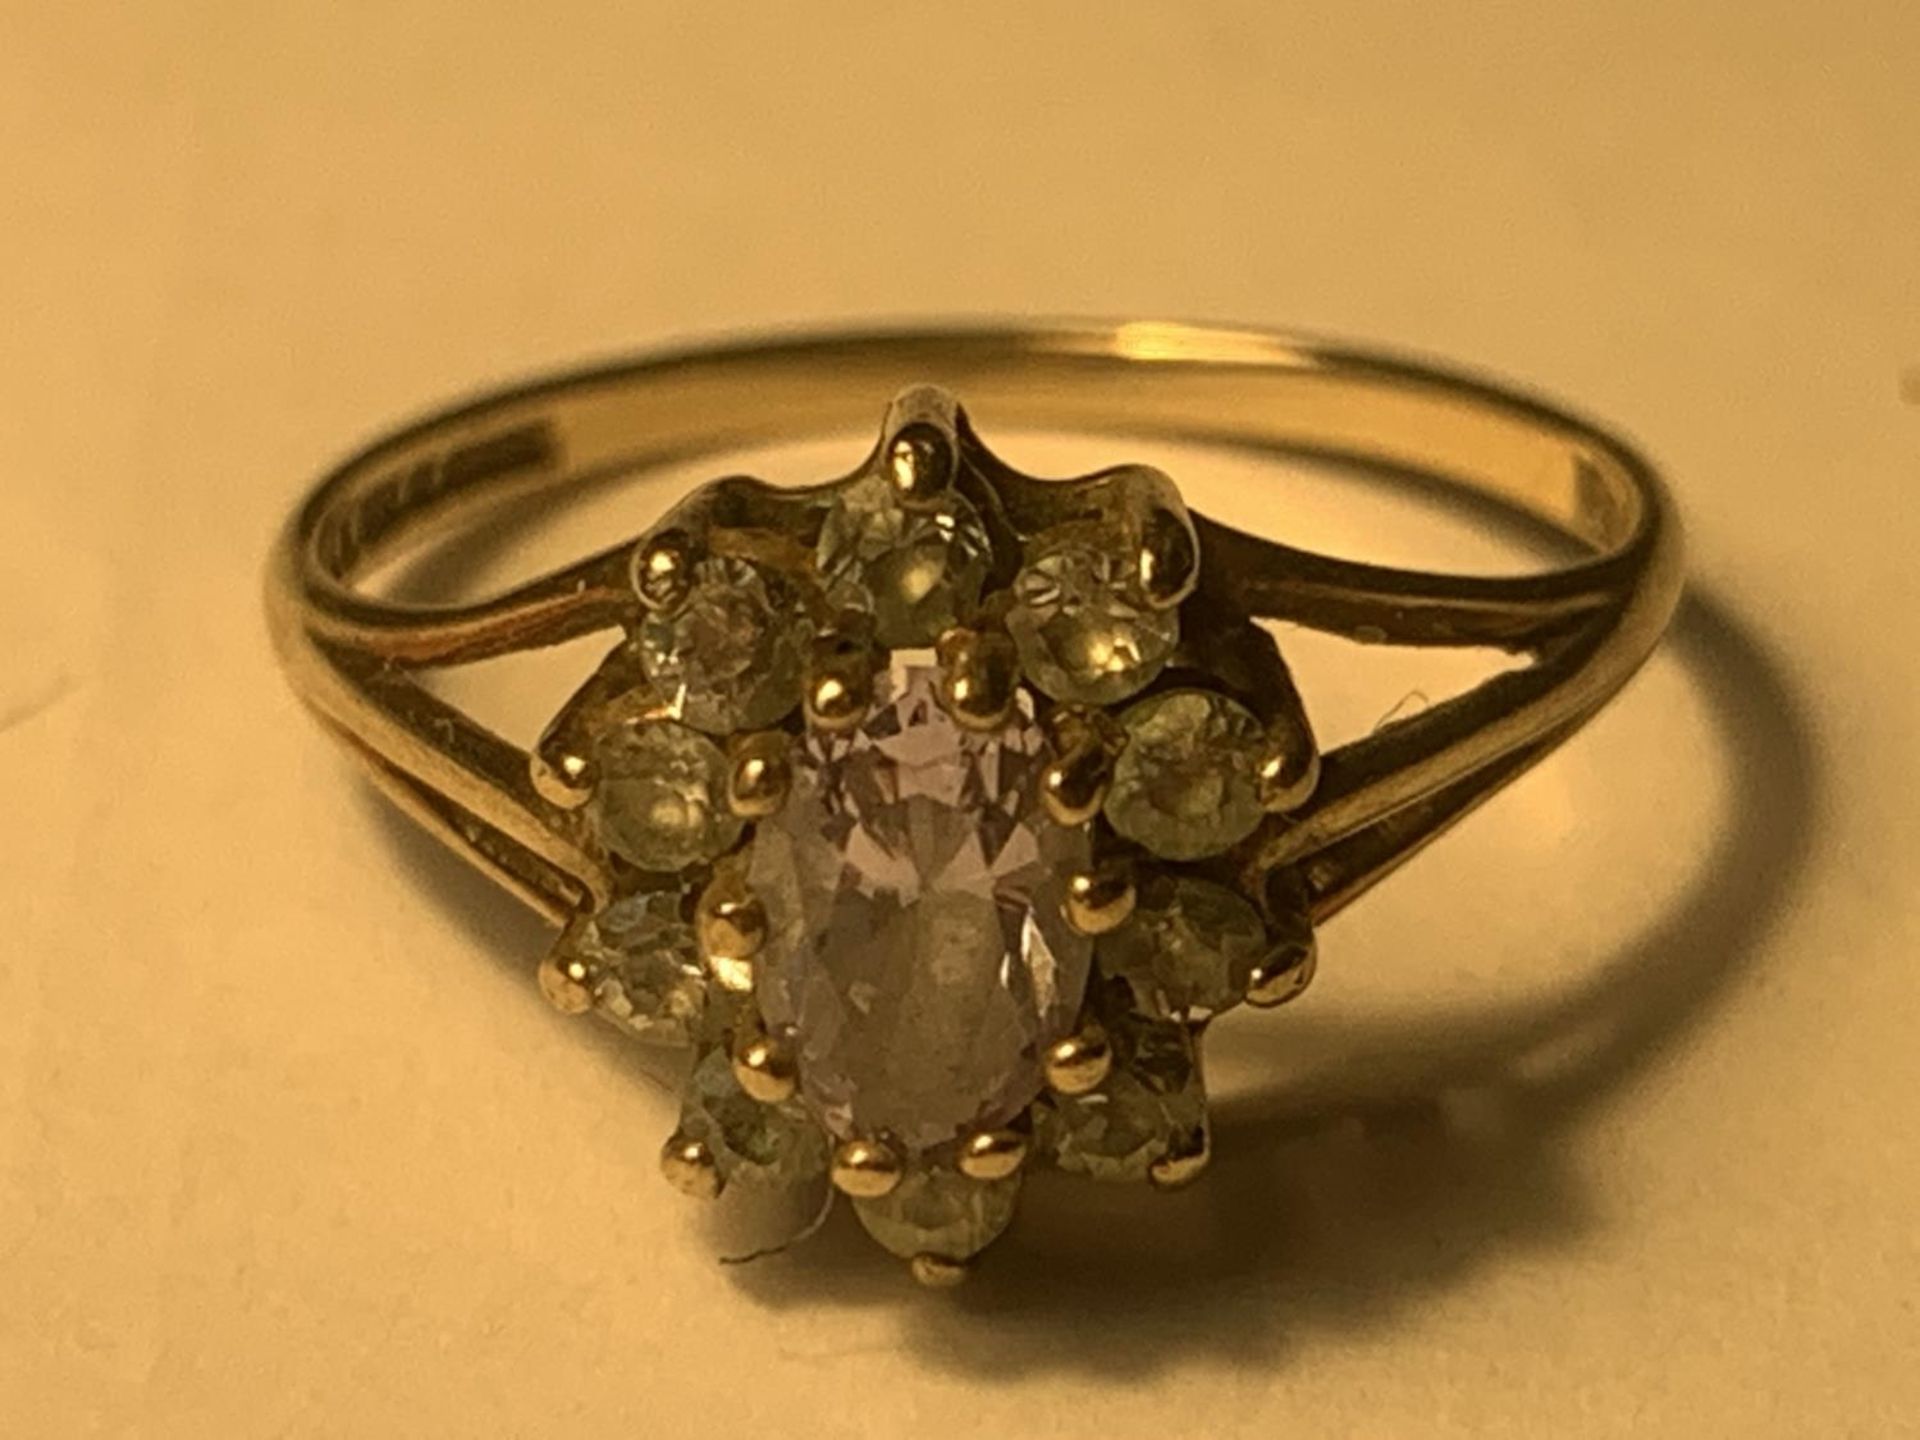 A 9 CARAT GOLD RING WITH CUBIC ZIRCONIAS IN A FLOWER DESIGN SIZE M GROSS WEIGHT 1.7 GRAMS